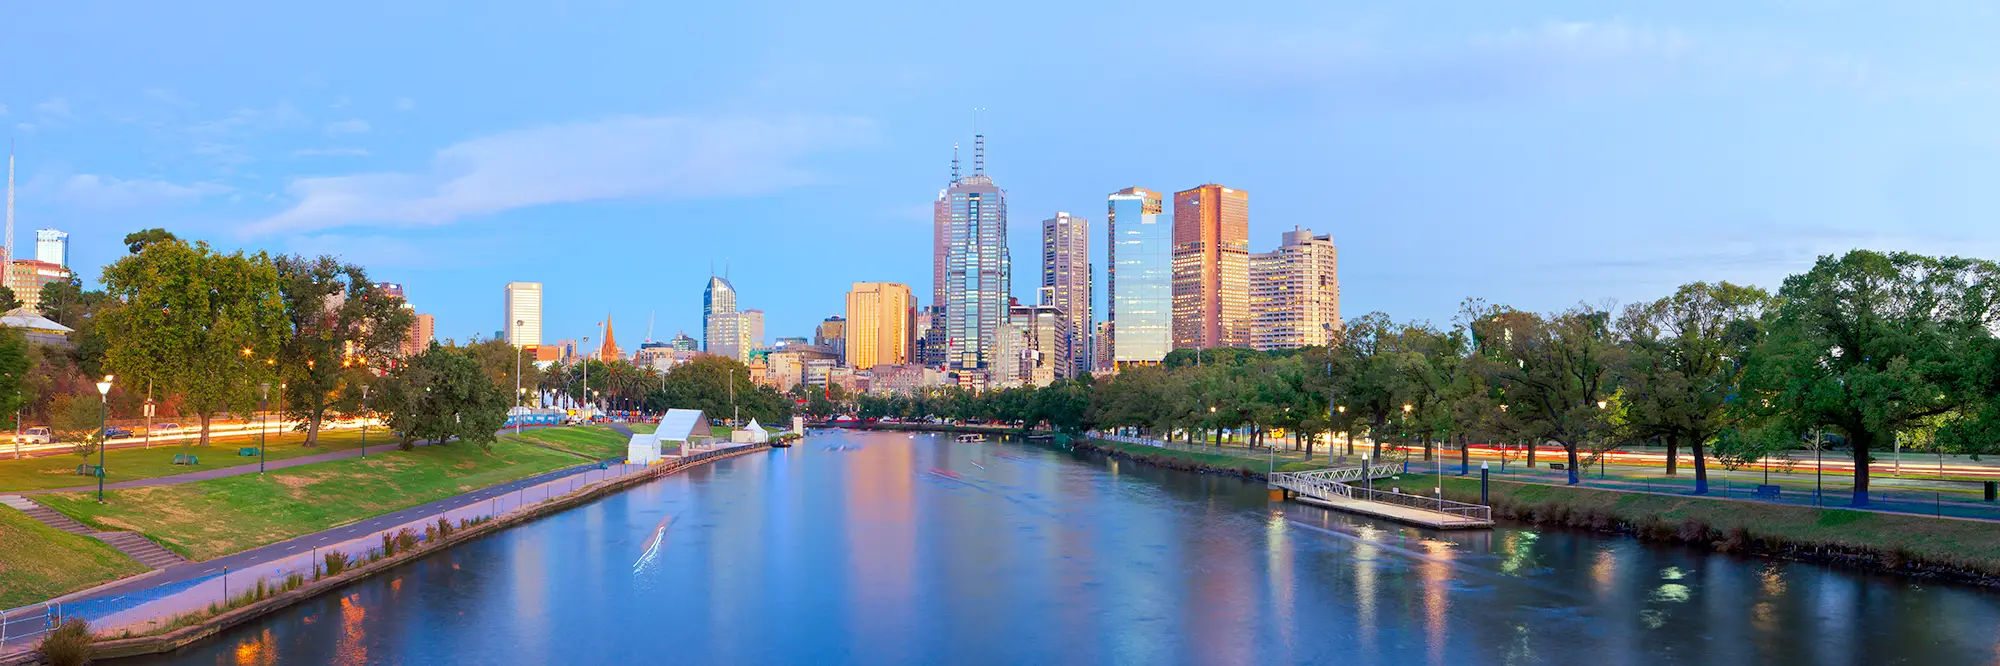 Melbourne City Panoramic Photos - Yarra River Rowers